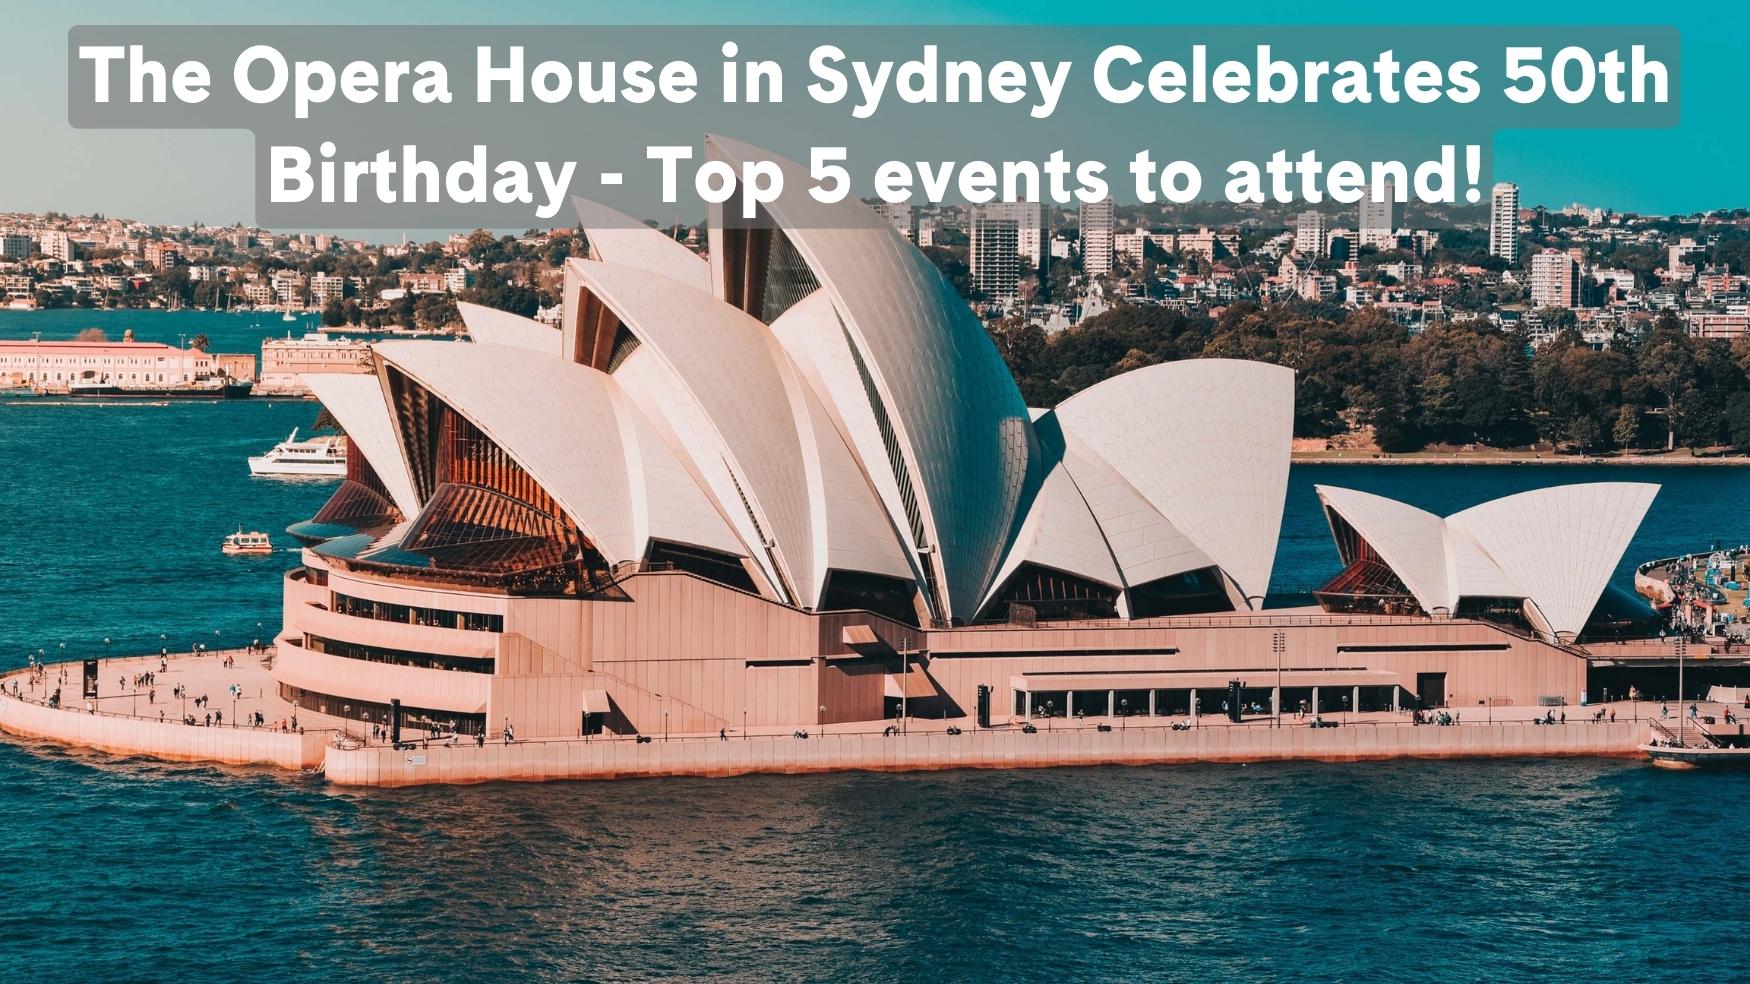 The Opera House in Sydney Celebrates 50th Birthday - Top 5 Events to Attend!